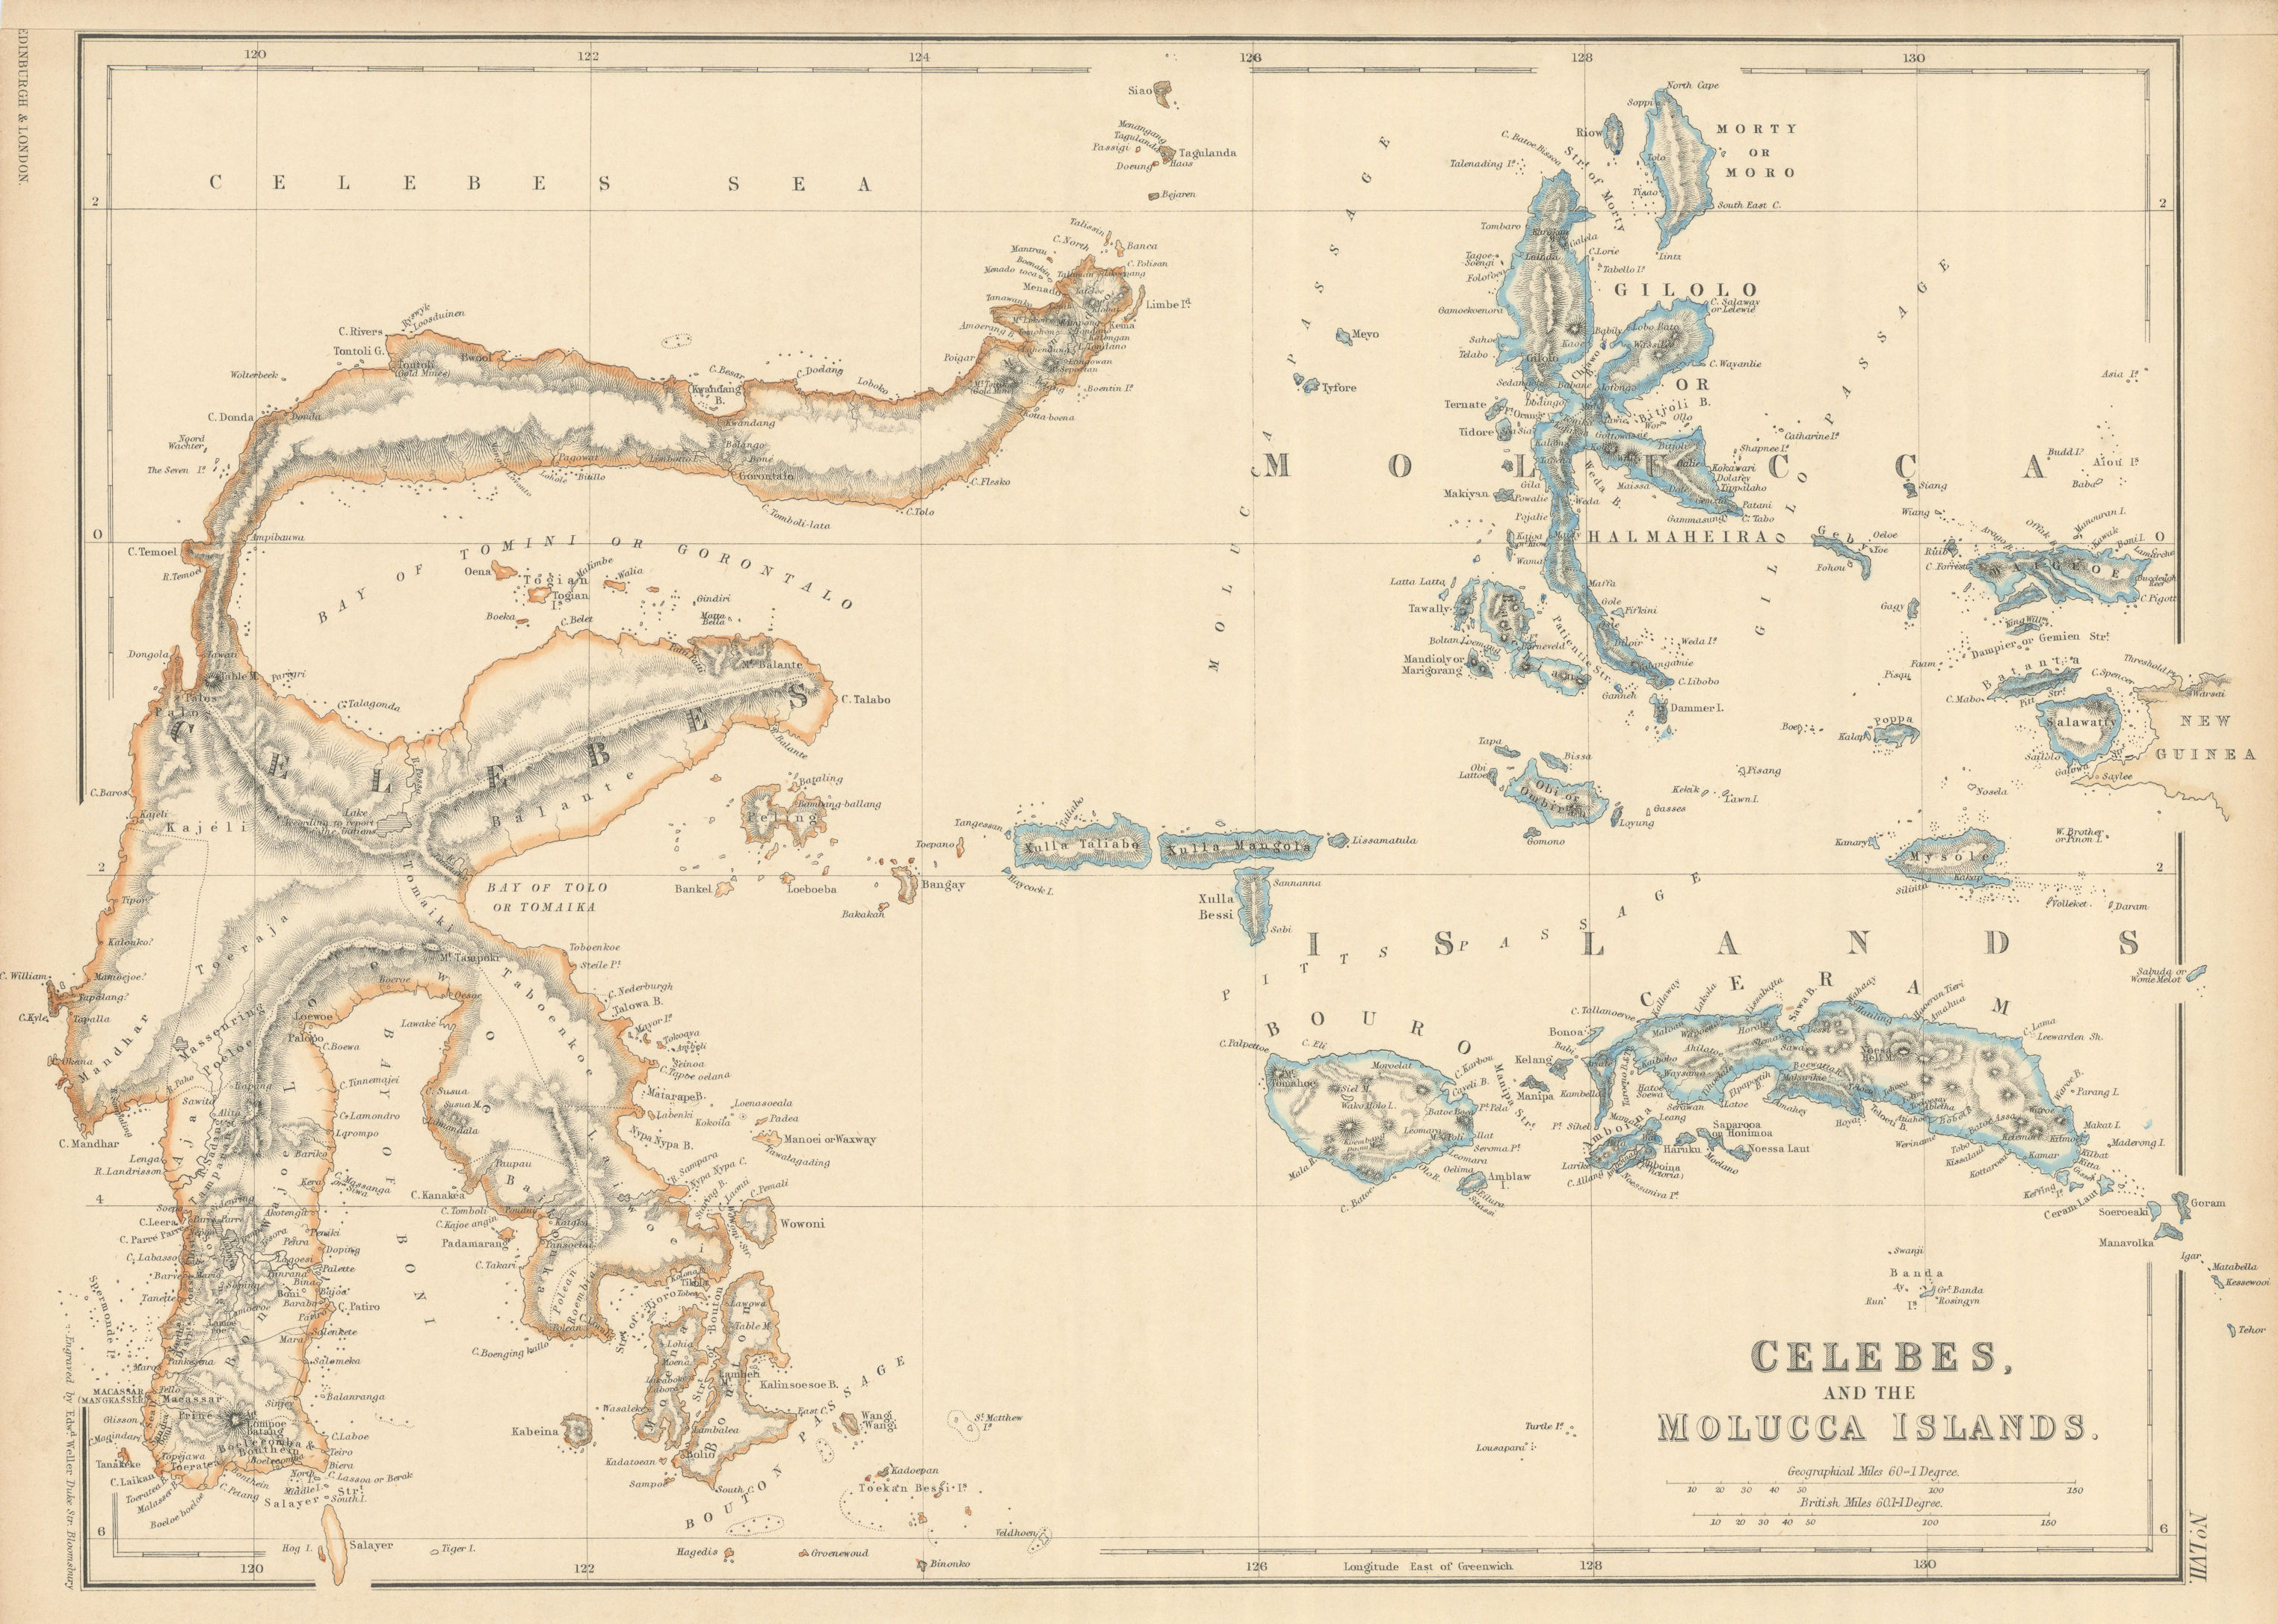 Associate Product Celebes and the Molucca Islands by Edward Weller. Indonesia Sulawesi 1860 map